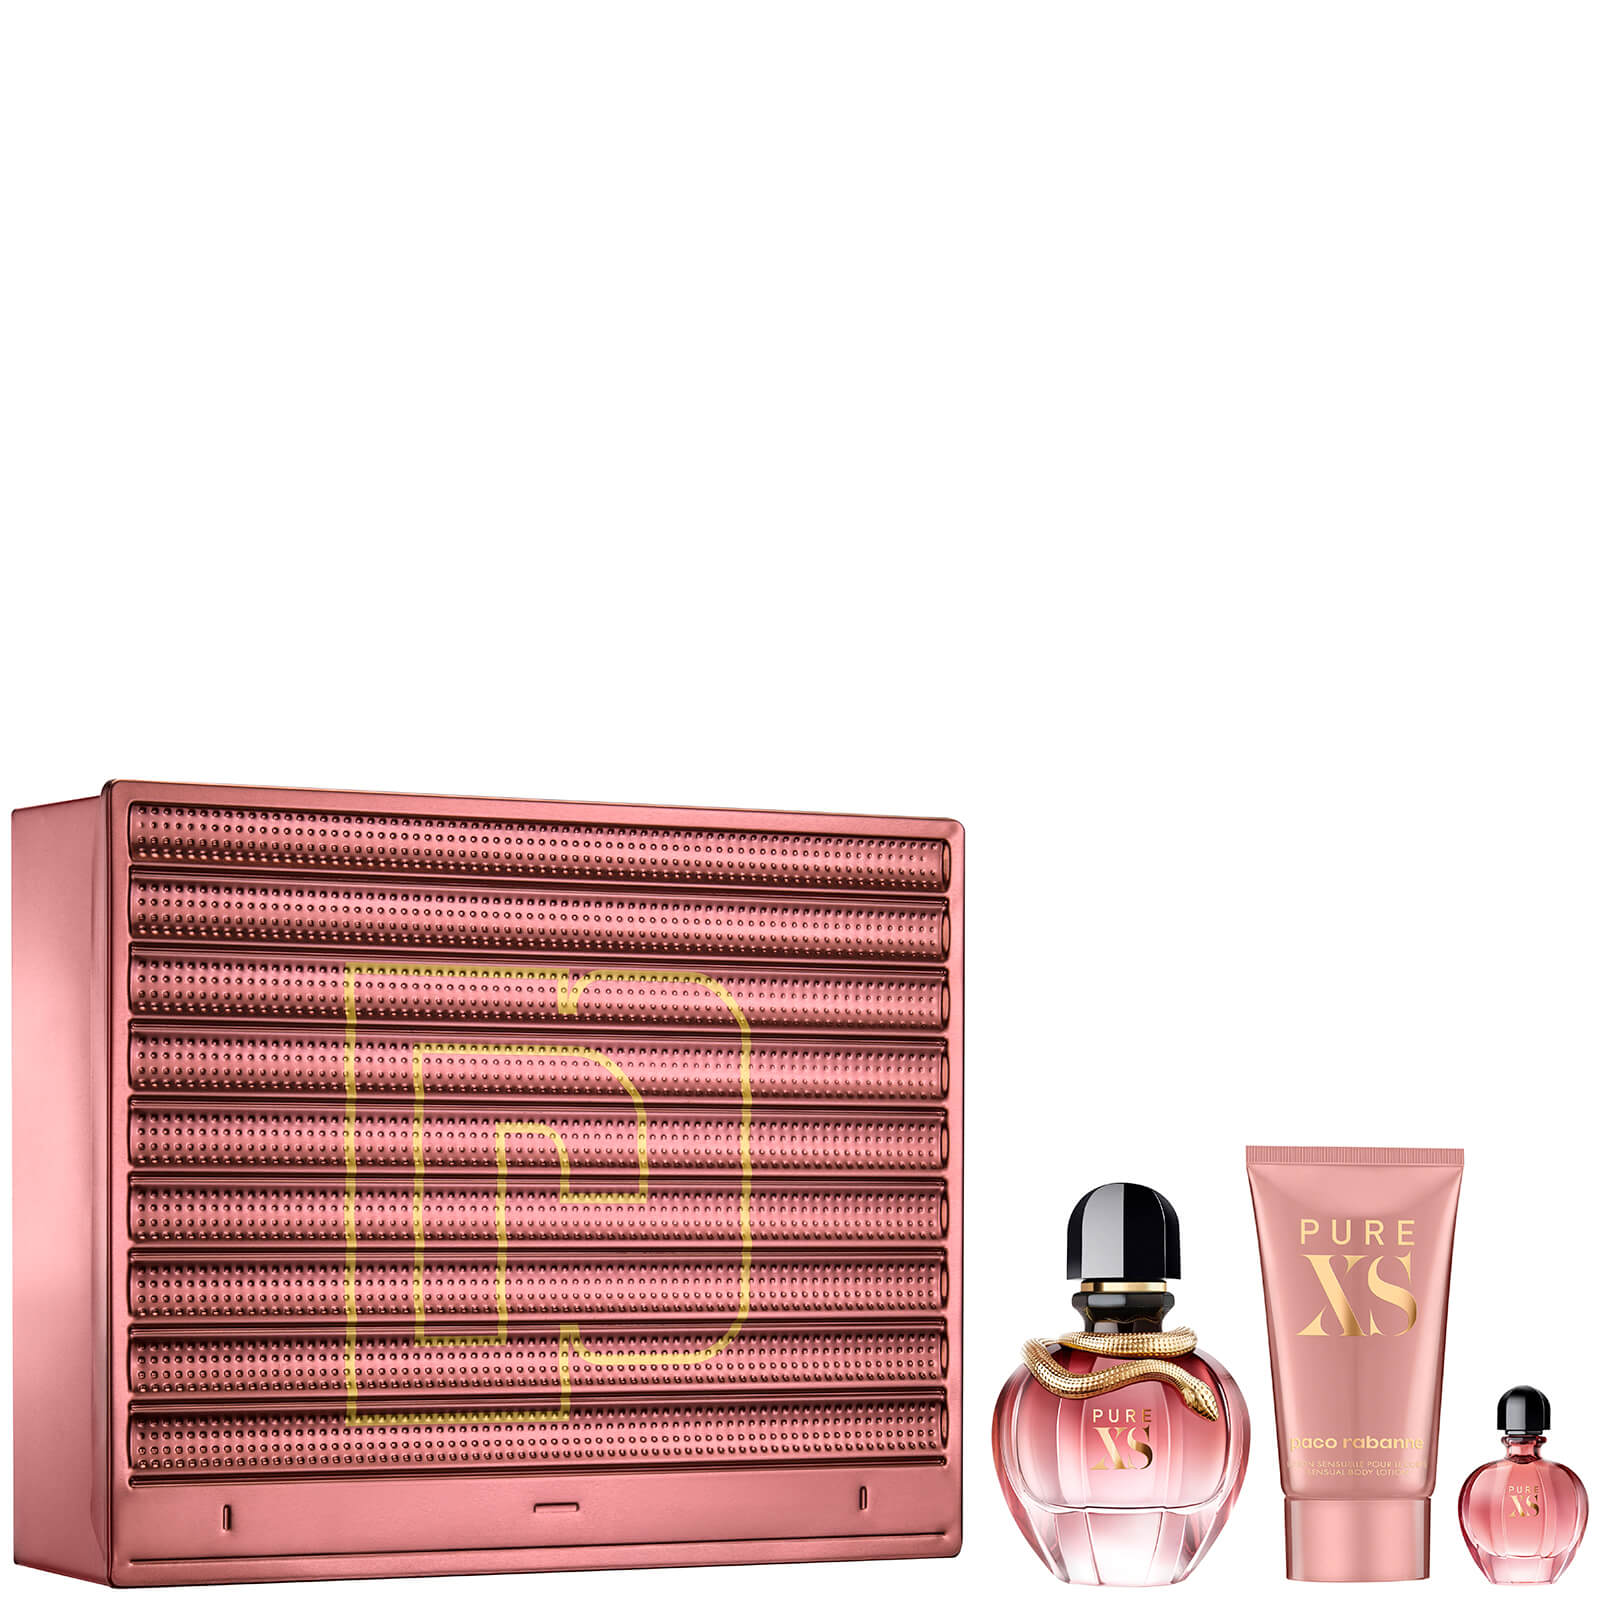 Paco Rabanne Pure XS for Her Eau de Parfum 50ml, Body Lotion 75ml and Mini Mother's Day 6ml